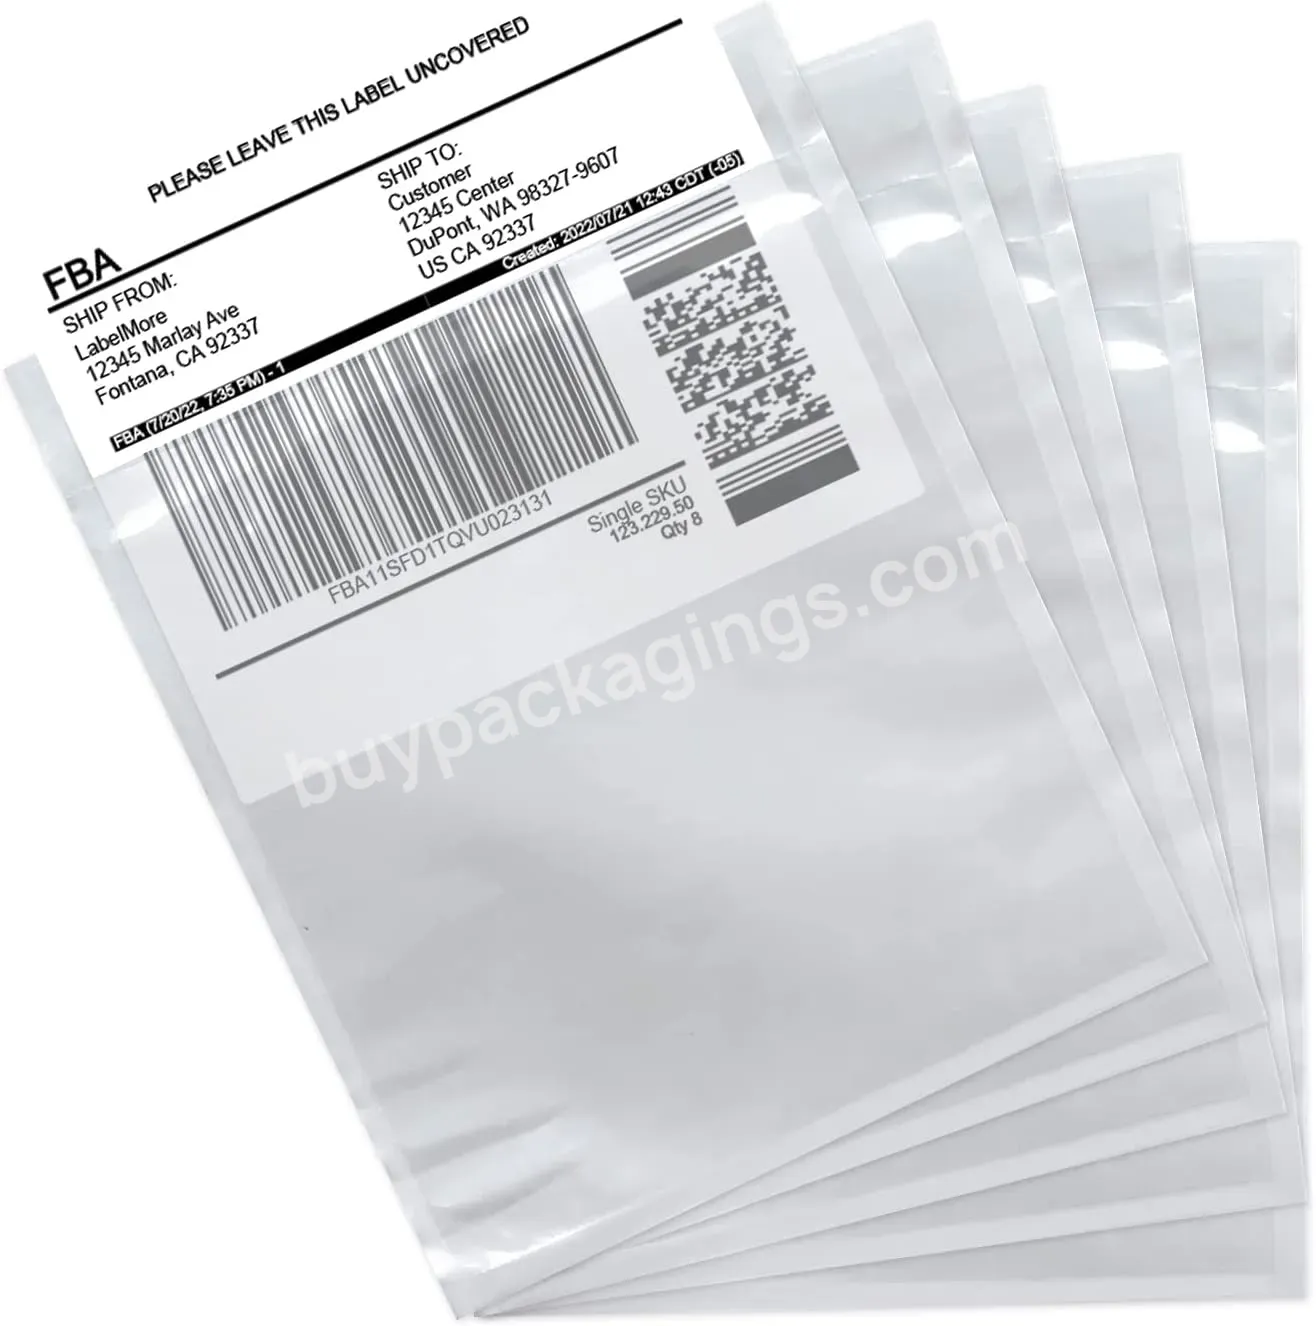 4.5 X 5.5 Packing List Envelopes Shipping Label Pouches Label Mailing Bags Invoice Postage Pocket For Invoice Shipping - Buy Invoice Pocket,Invoice Postage Pocket,Label Mailing Bags.